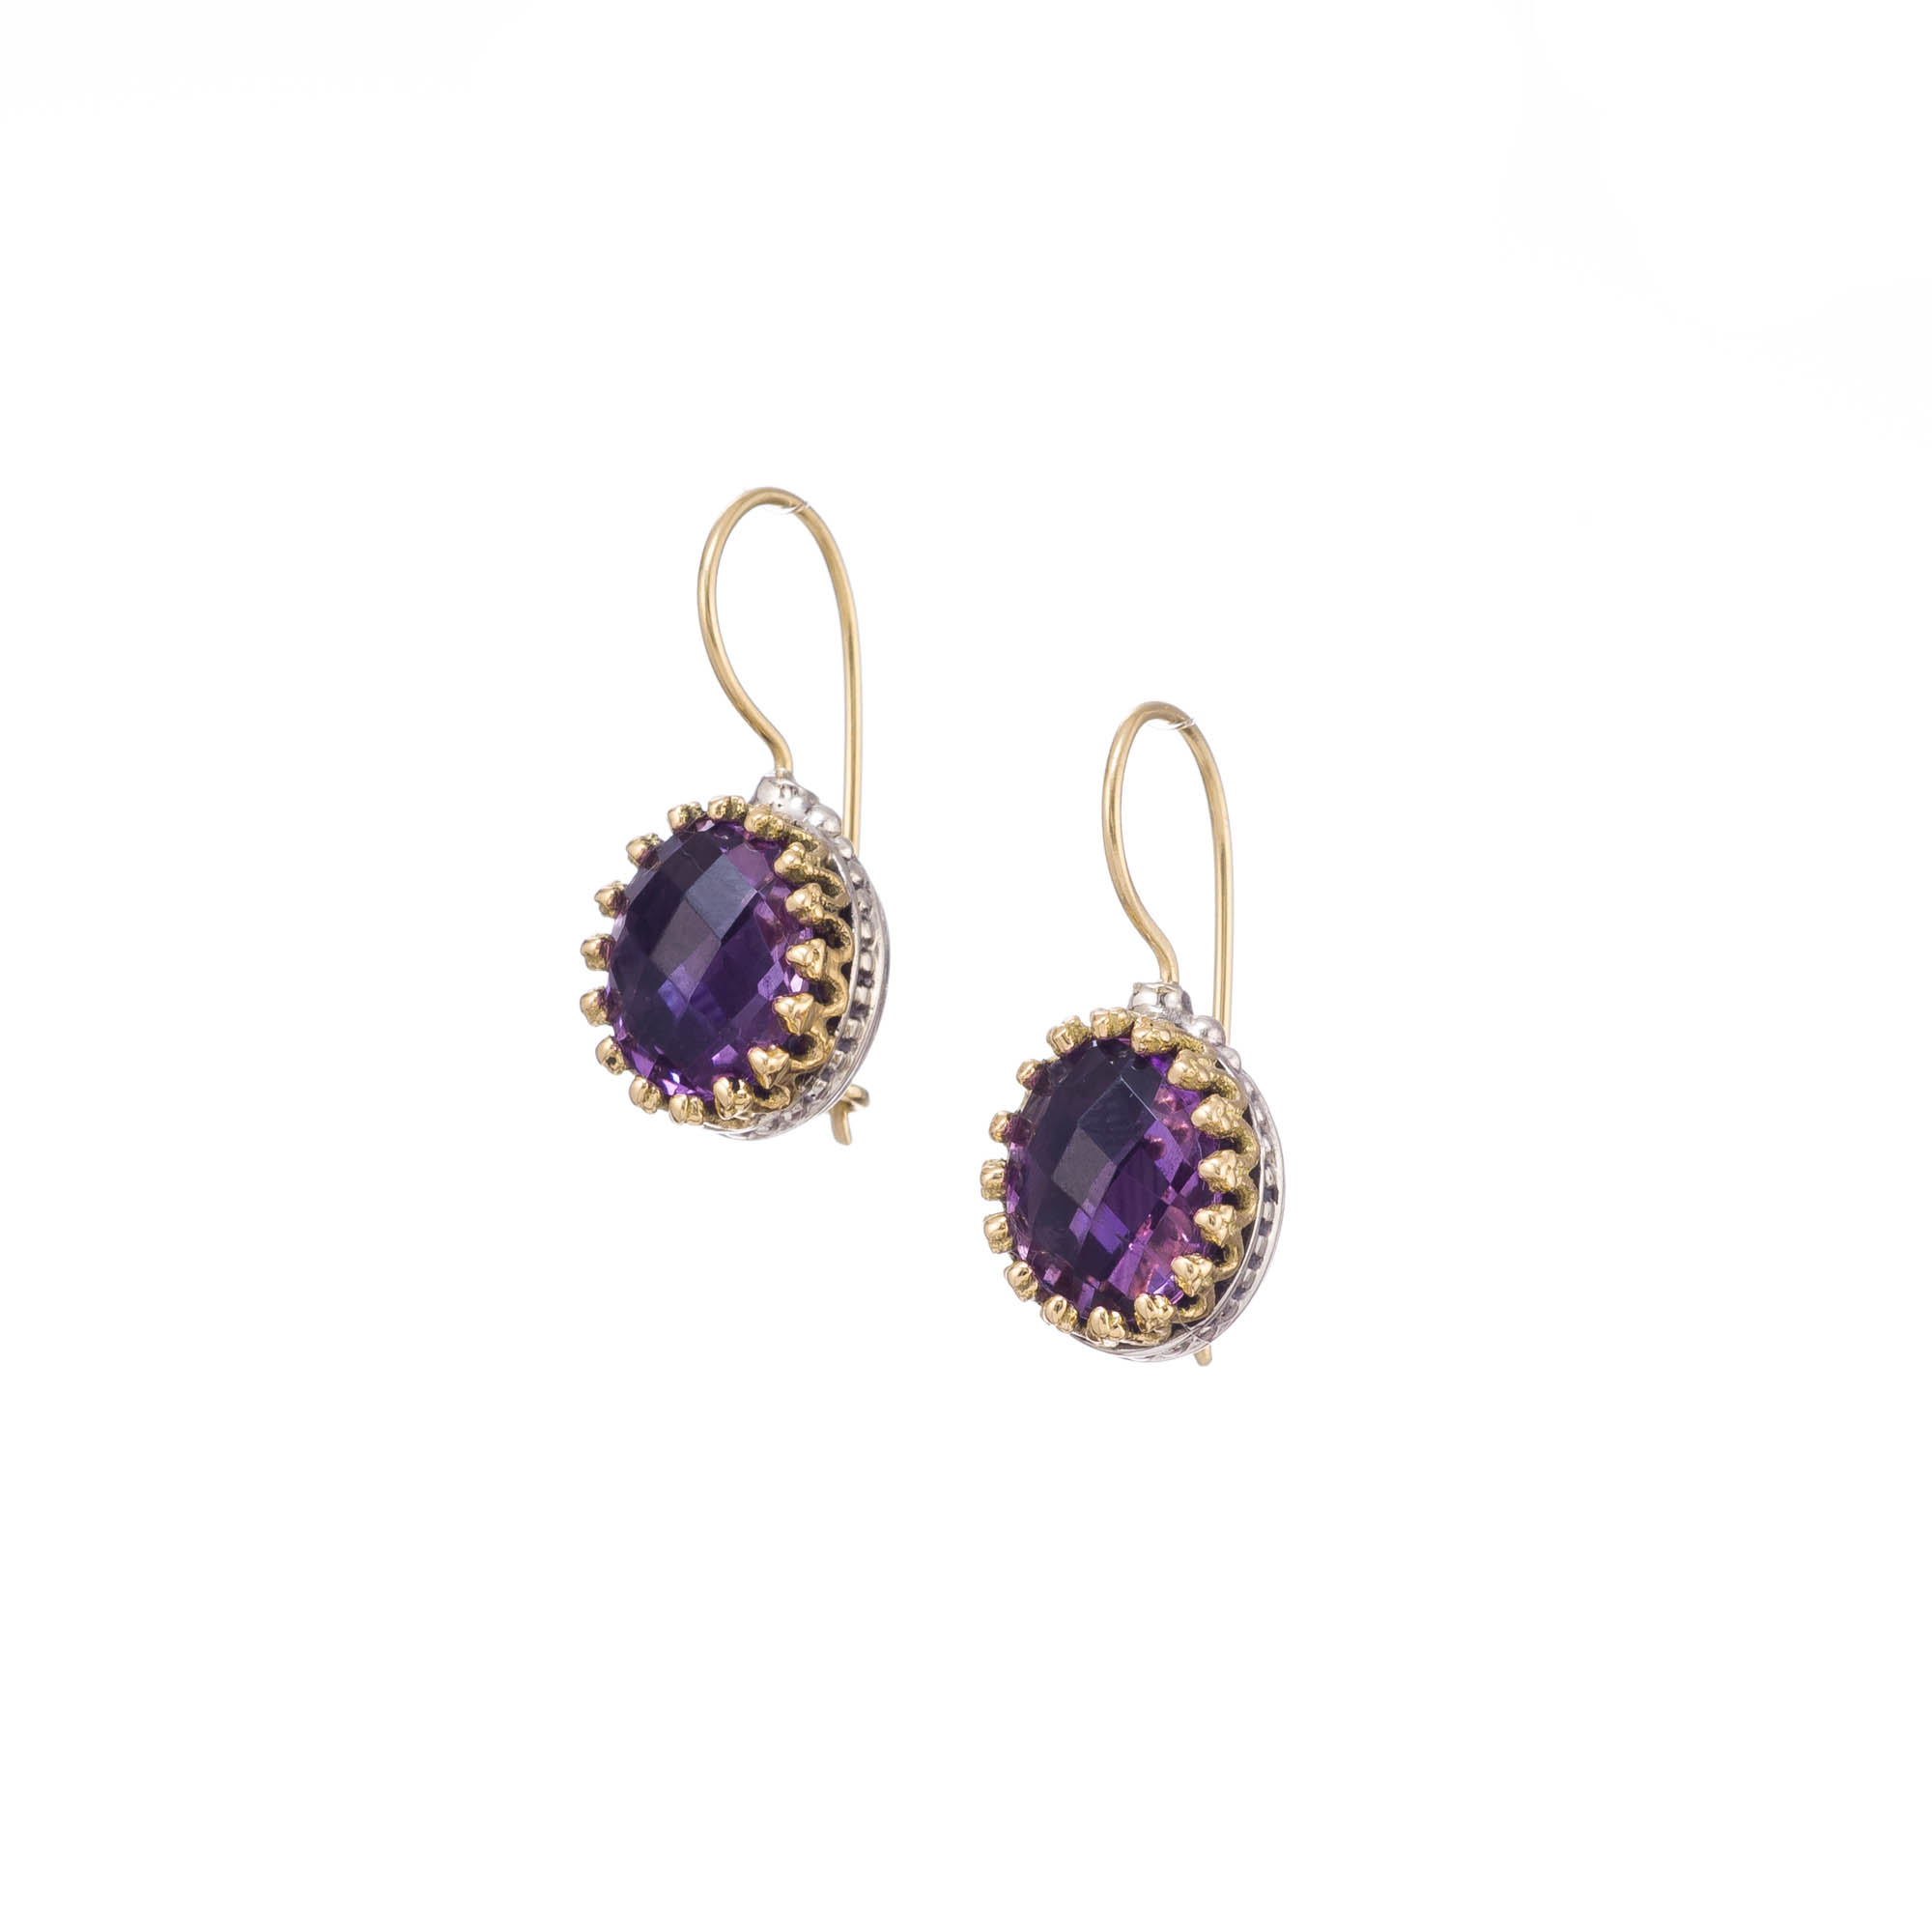 Crown oval earrings in 18K Gold and Sterling Silver with amethyst